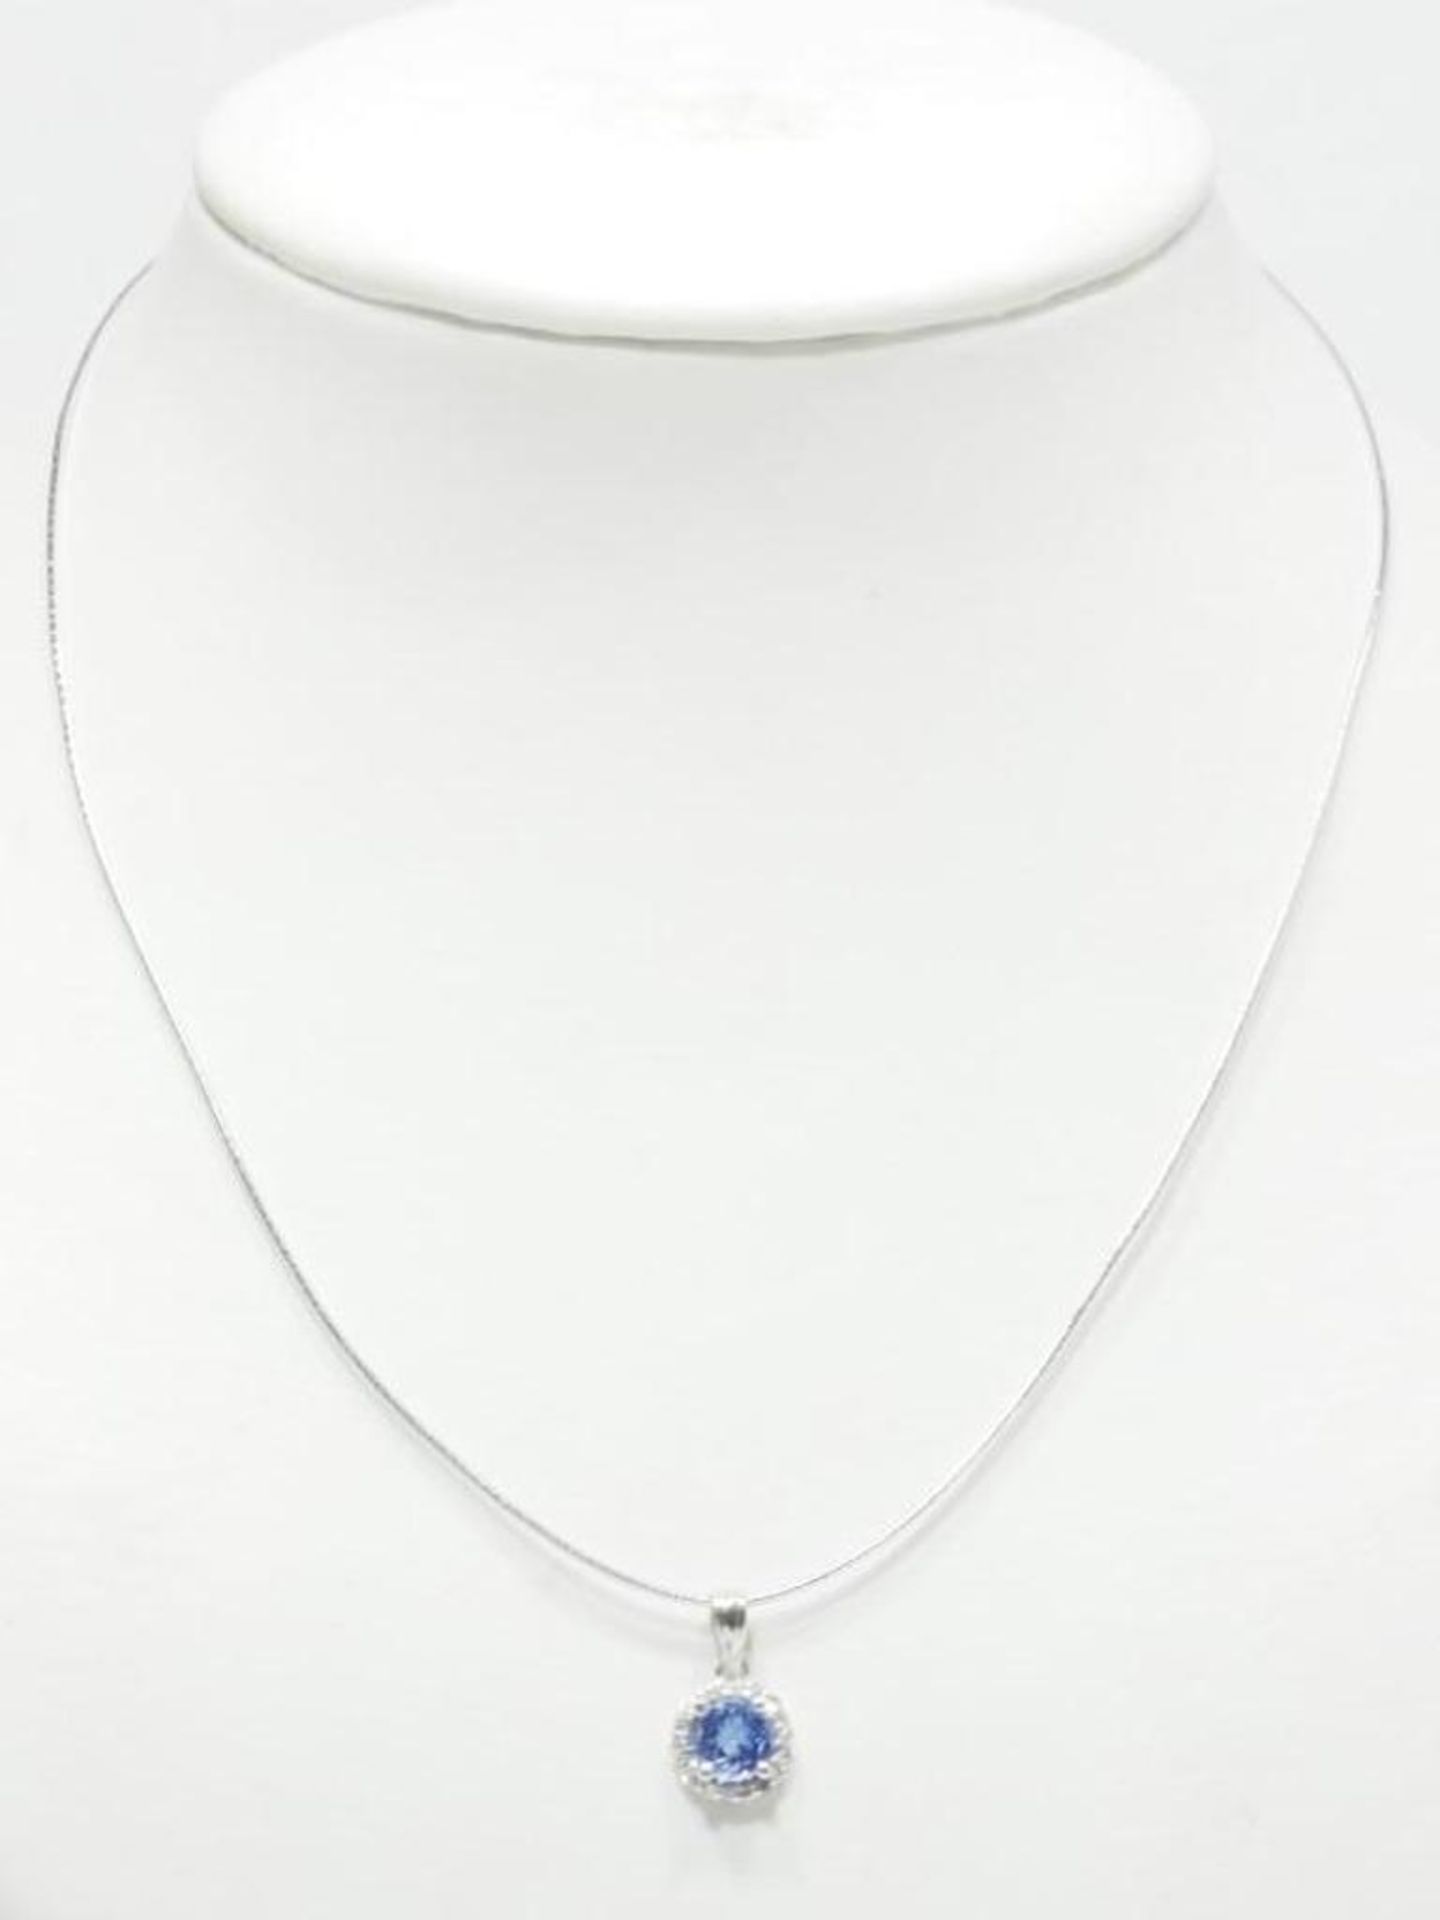 14K White Gold Tanzanite(0.80ct) Diamond(0.18ct) Necklace with Japanese Steel Cord. Insurance Value - Image 2 of 3